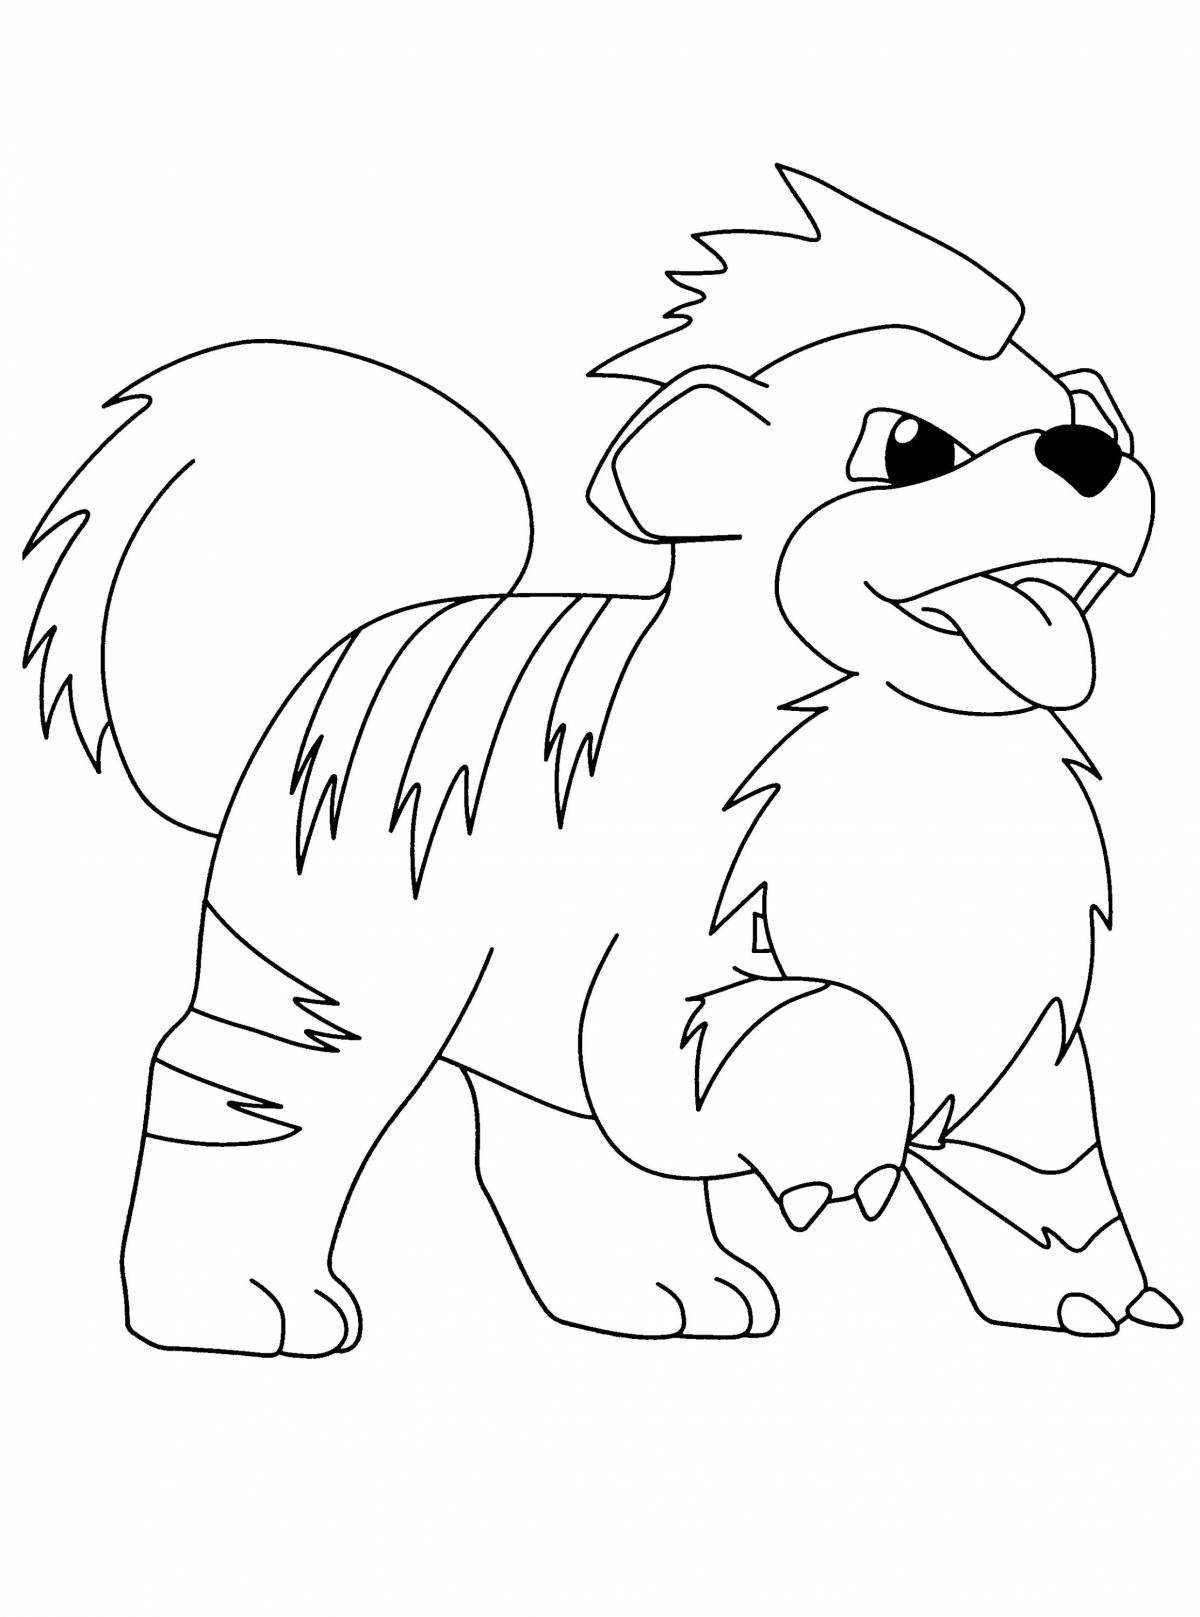 Amazing squick coloring page